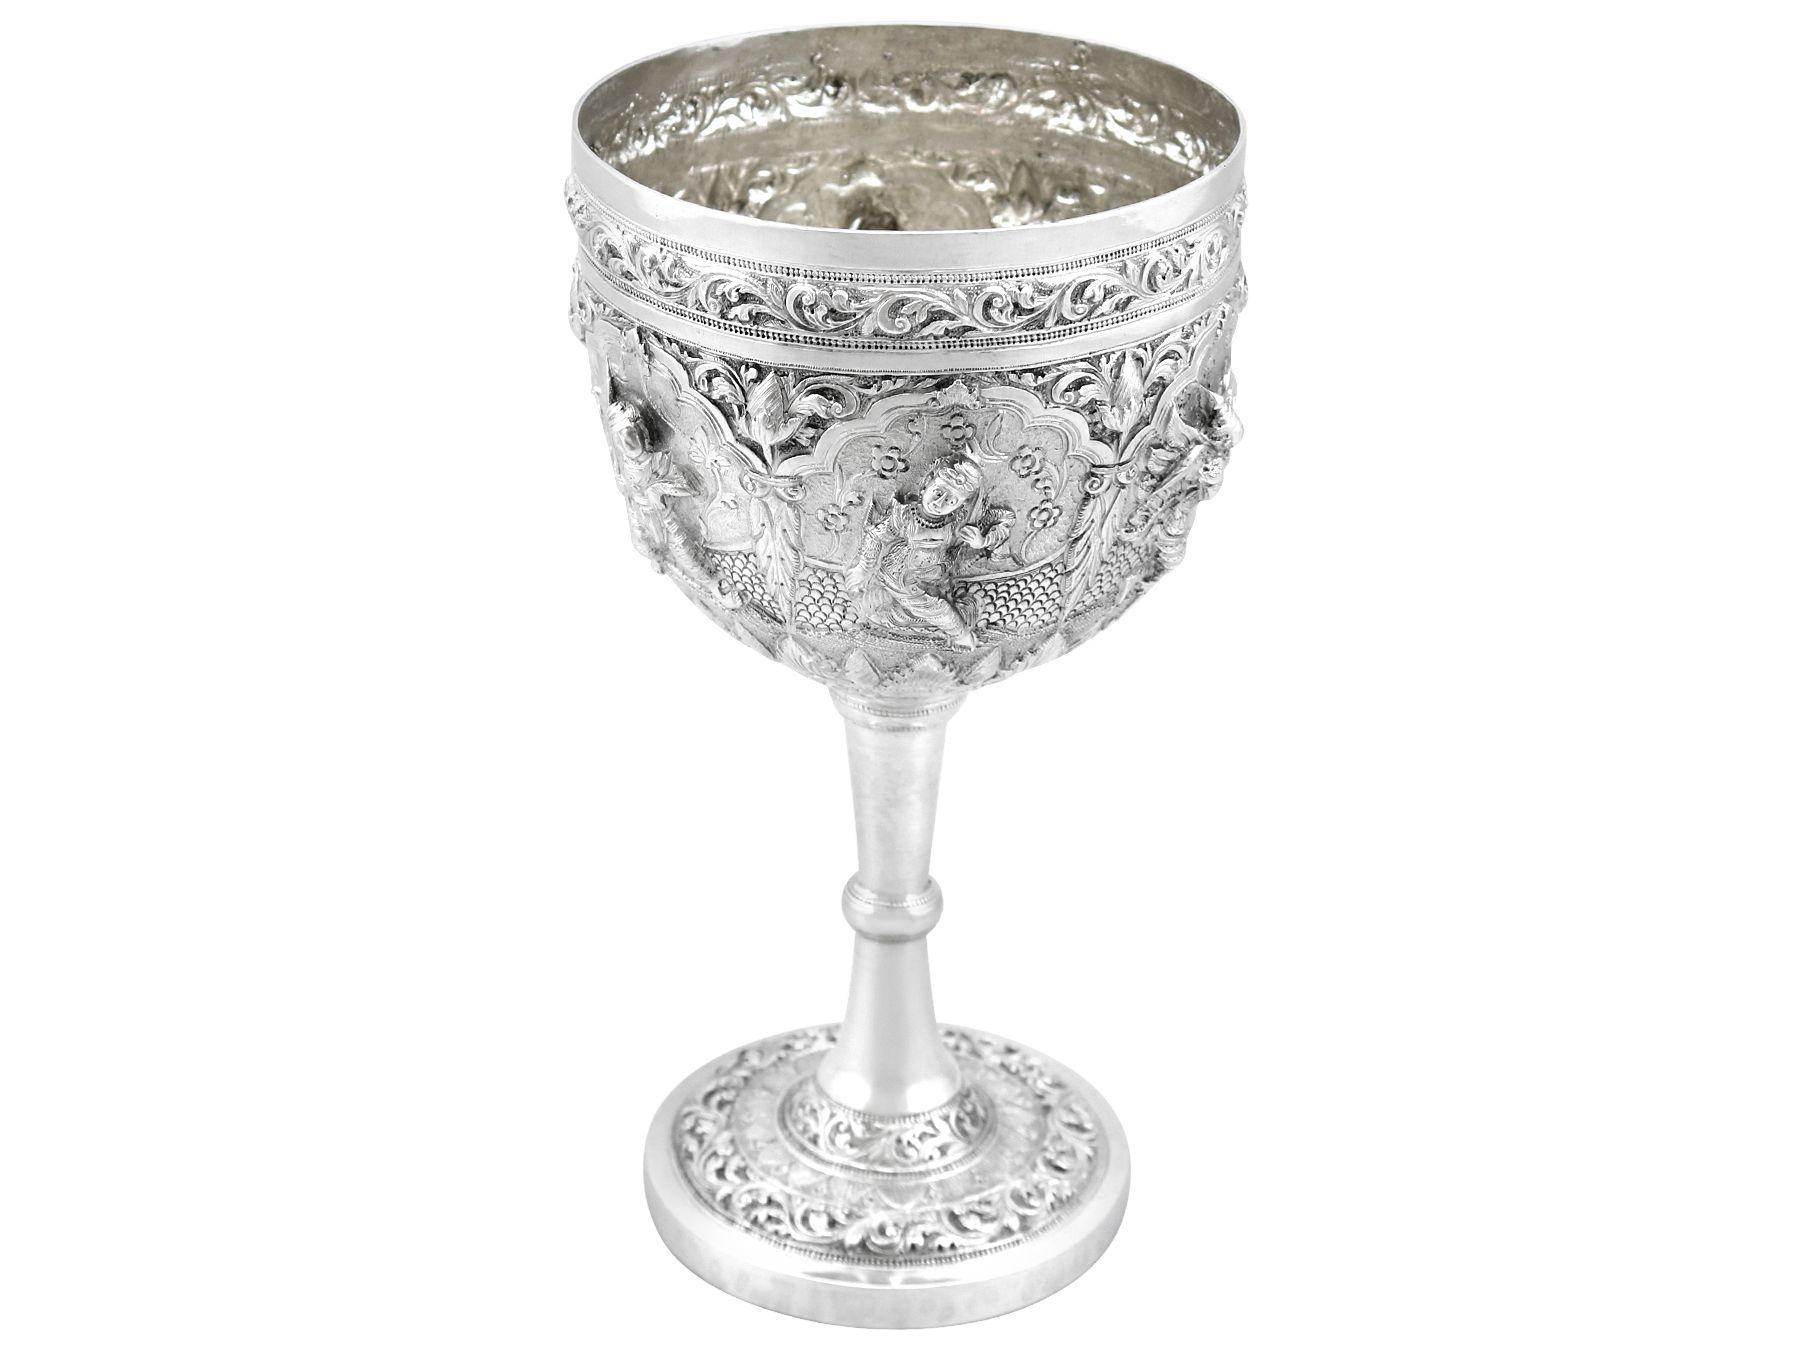 An exceptional, fine and impressive antique Burmese silver goblet; an addition to our wine and drinks related silverware collection.

This exceptional antique Burmese silver goblet has a circular bell shaped form, to a knopped stem and circular